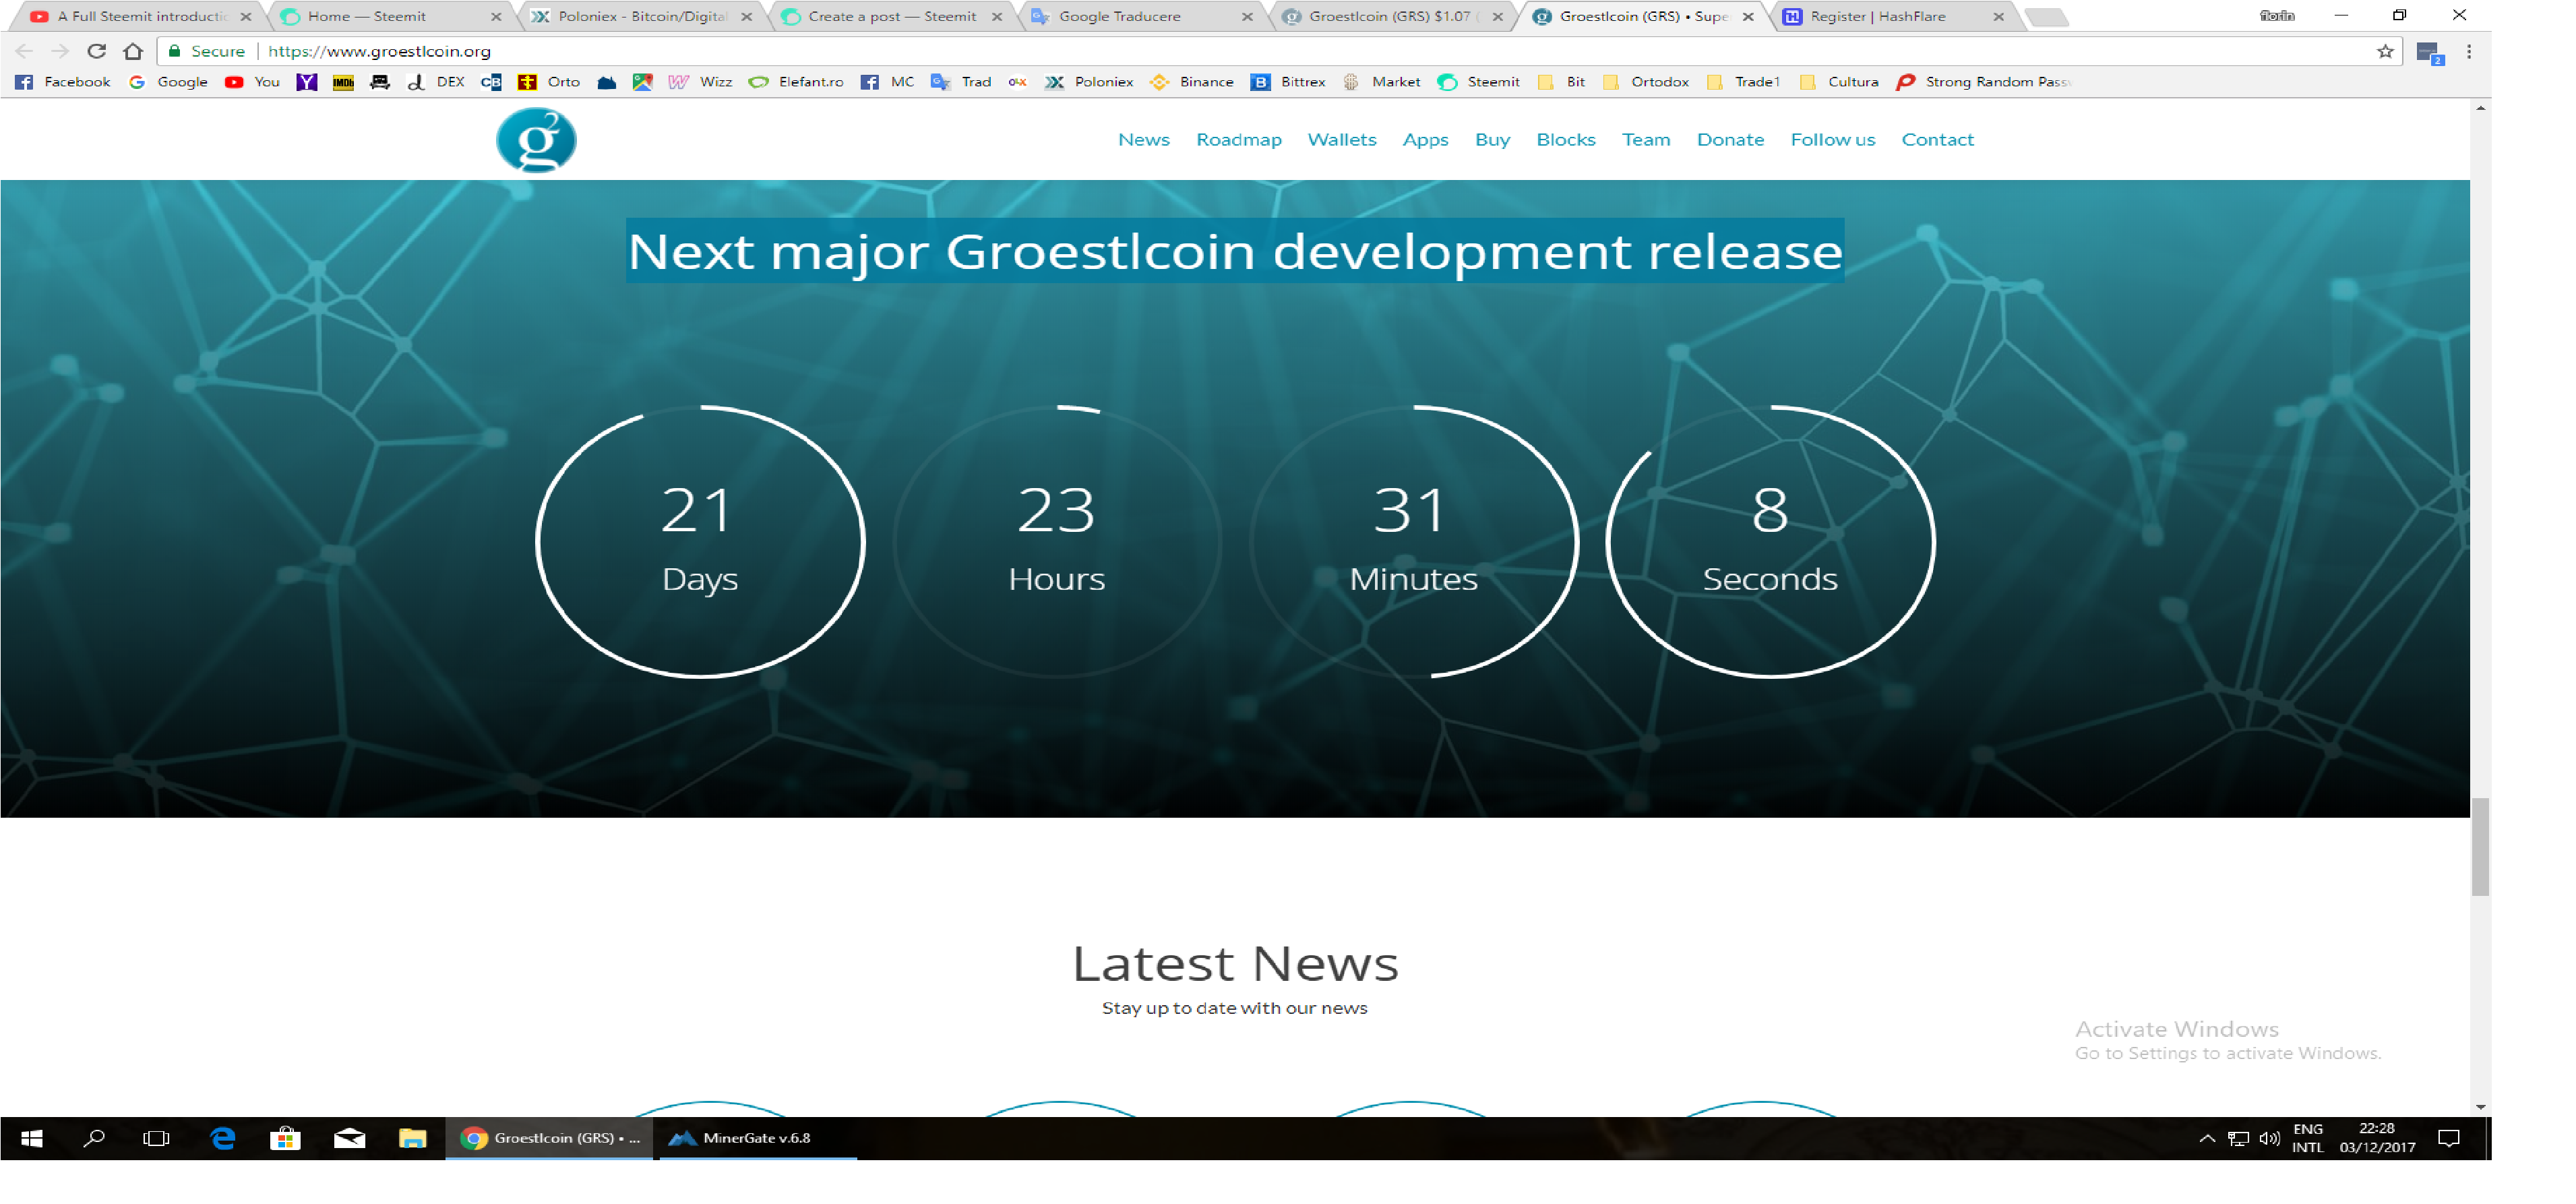 Groestlcoin (GRS) Posts 200% Price Surge After Being Endorsed By MasterCard, Only To Then Fall 33%